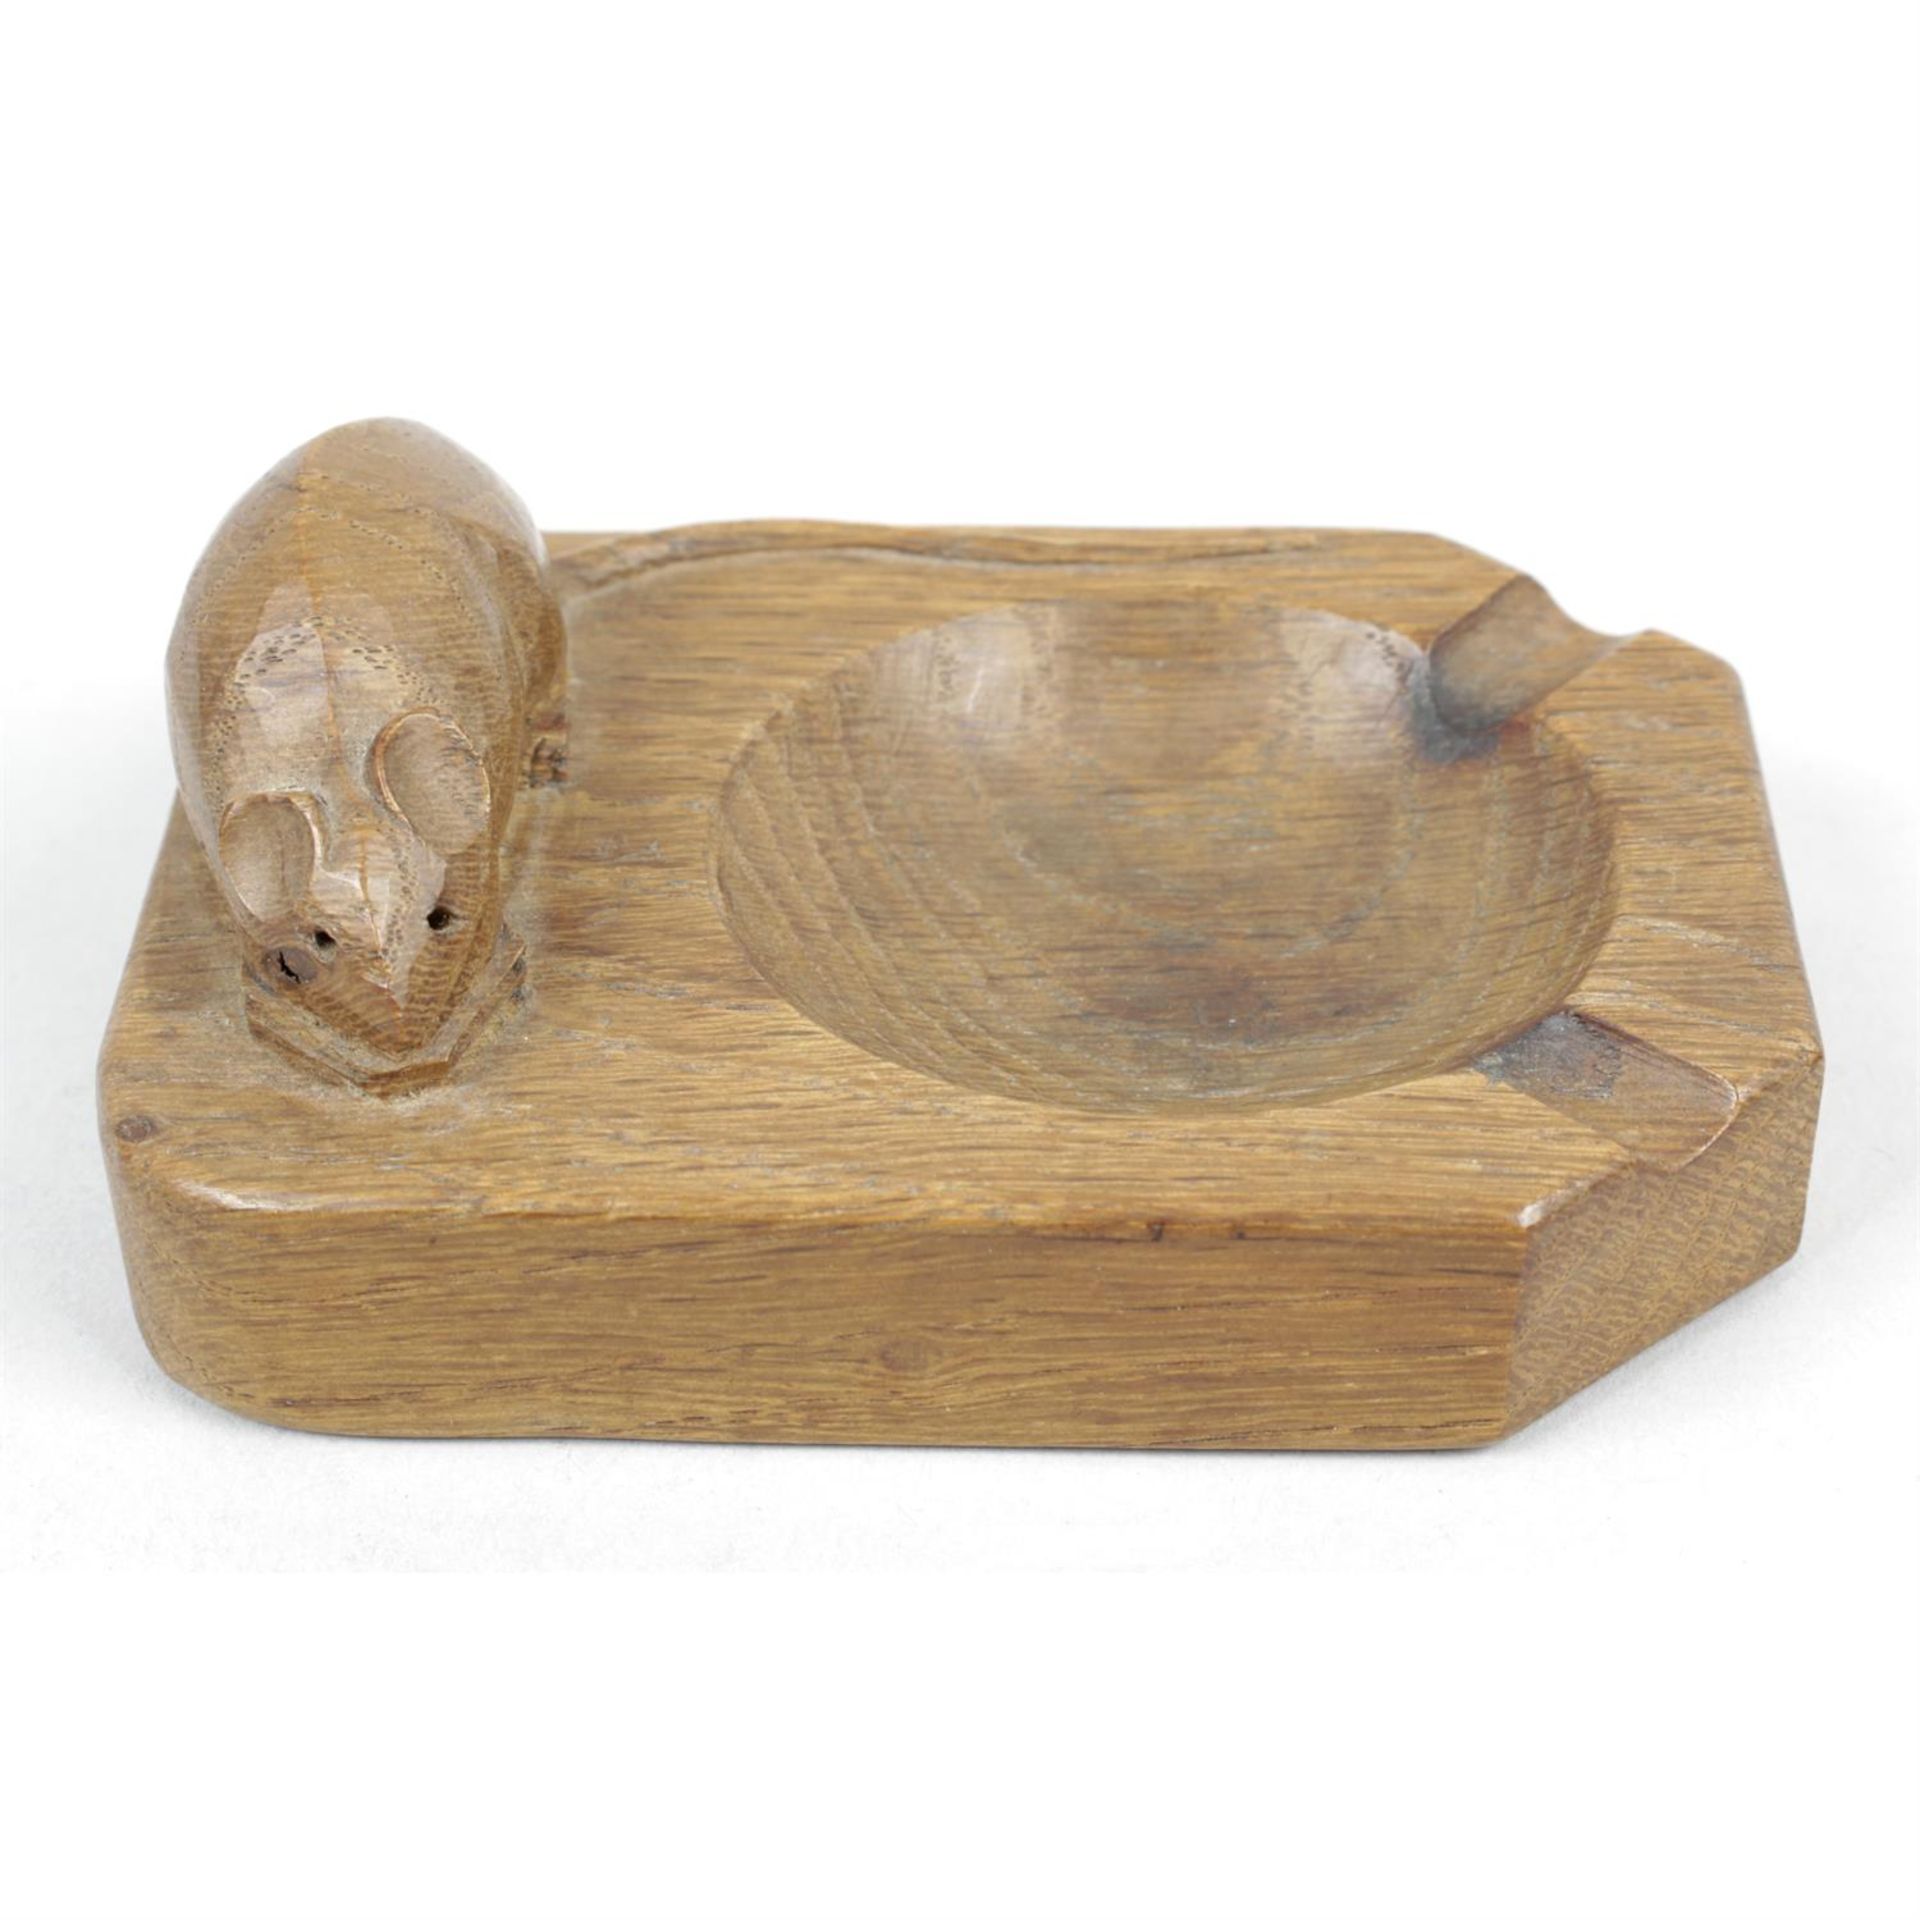 A 'Mouseman' carved wooden ashtray.